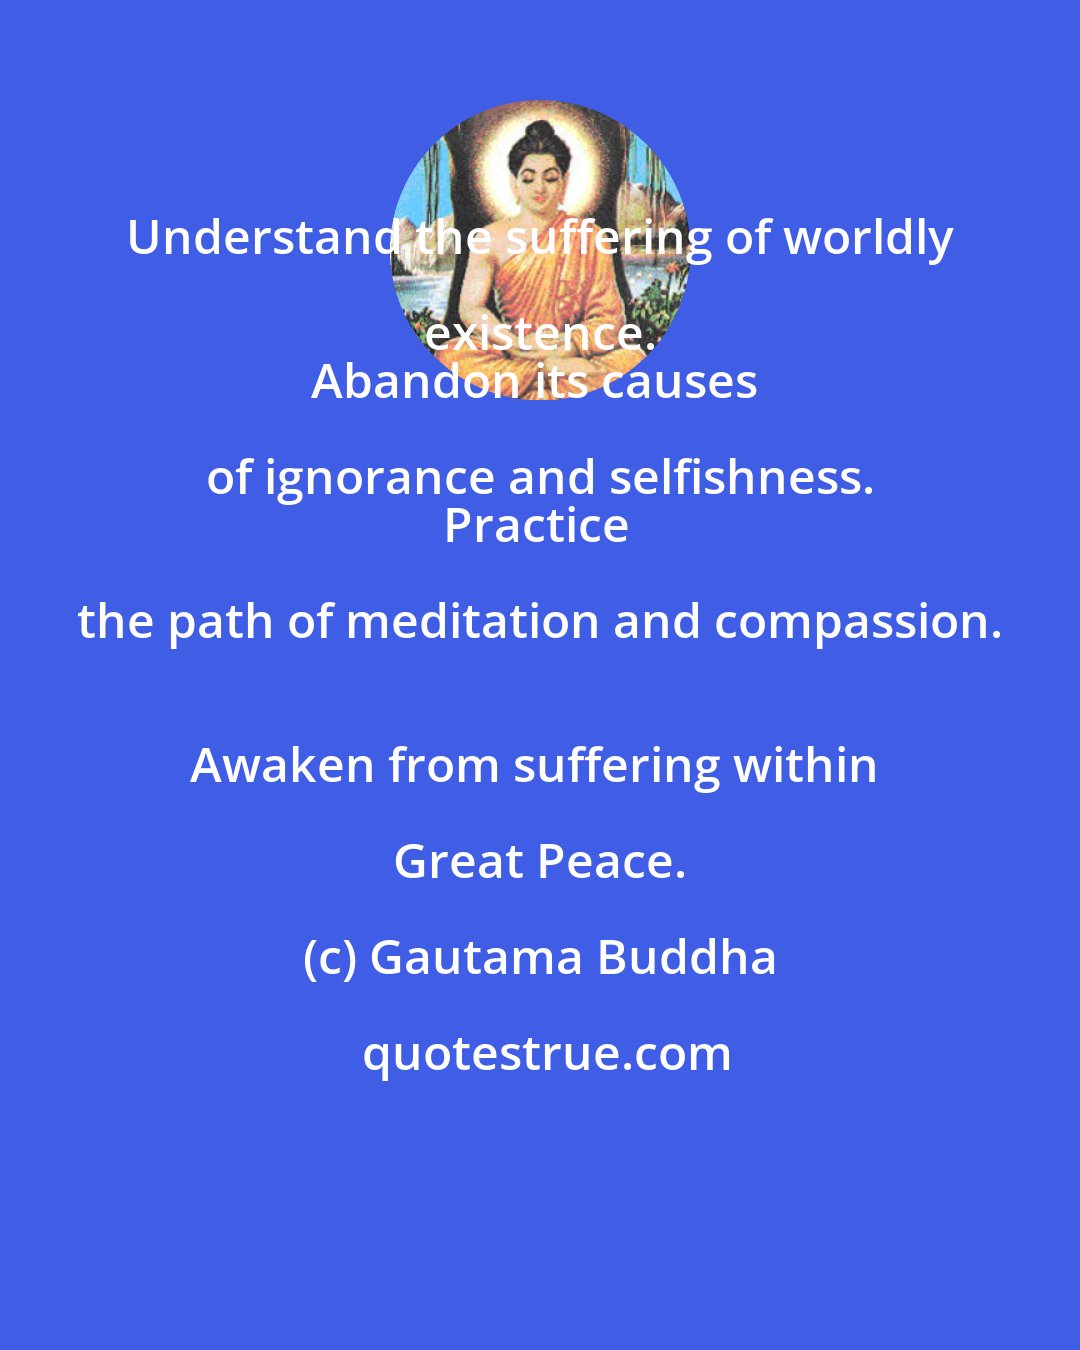 Gautama Buddha: Understand the suffering of worldly existence. 
Abandon its causes of ignorance and selfishness. 
Practice the path of meditation and compassion. 
Awaken from suffering within Great Peace.